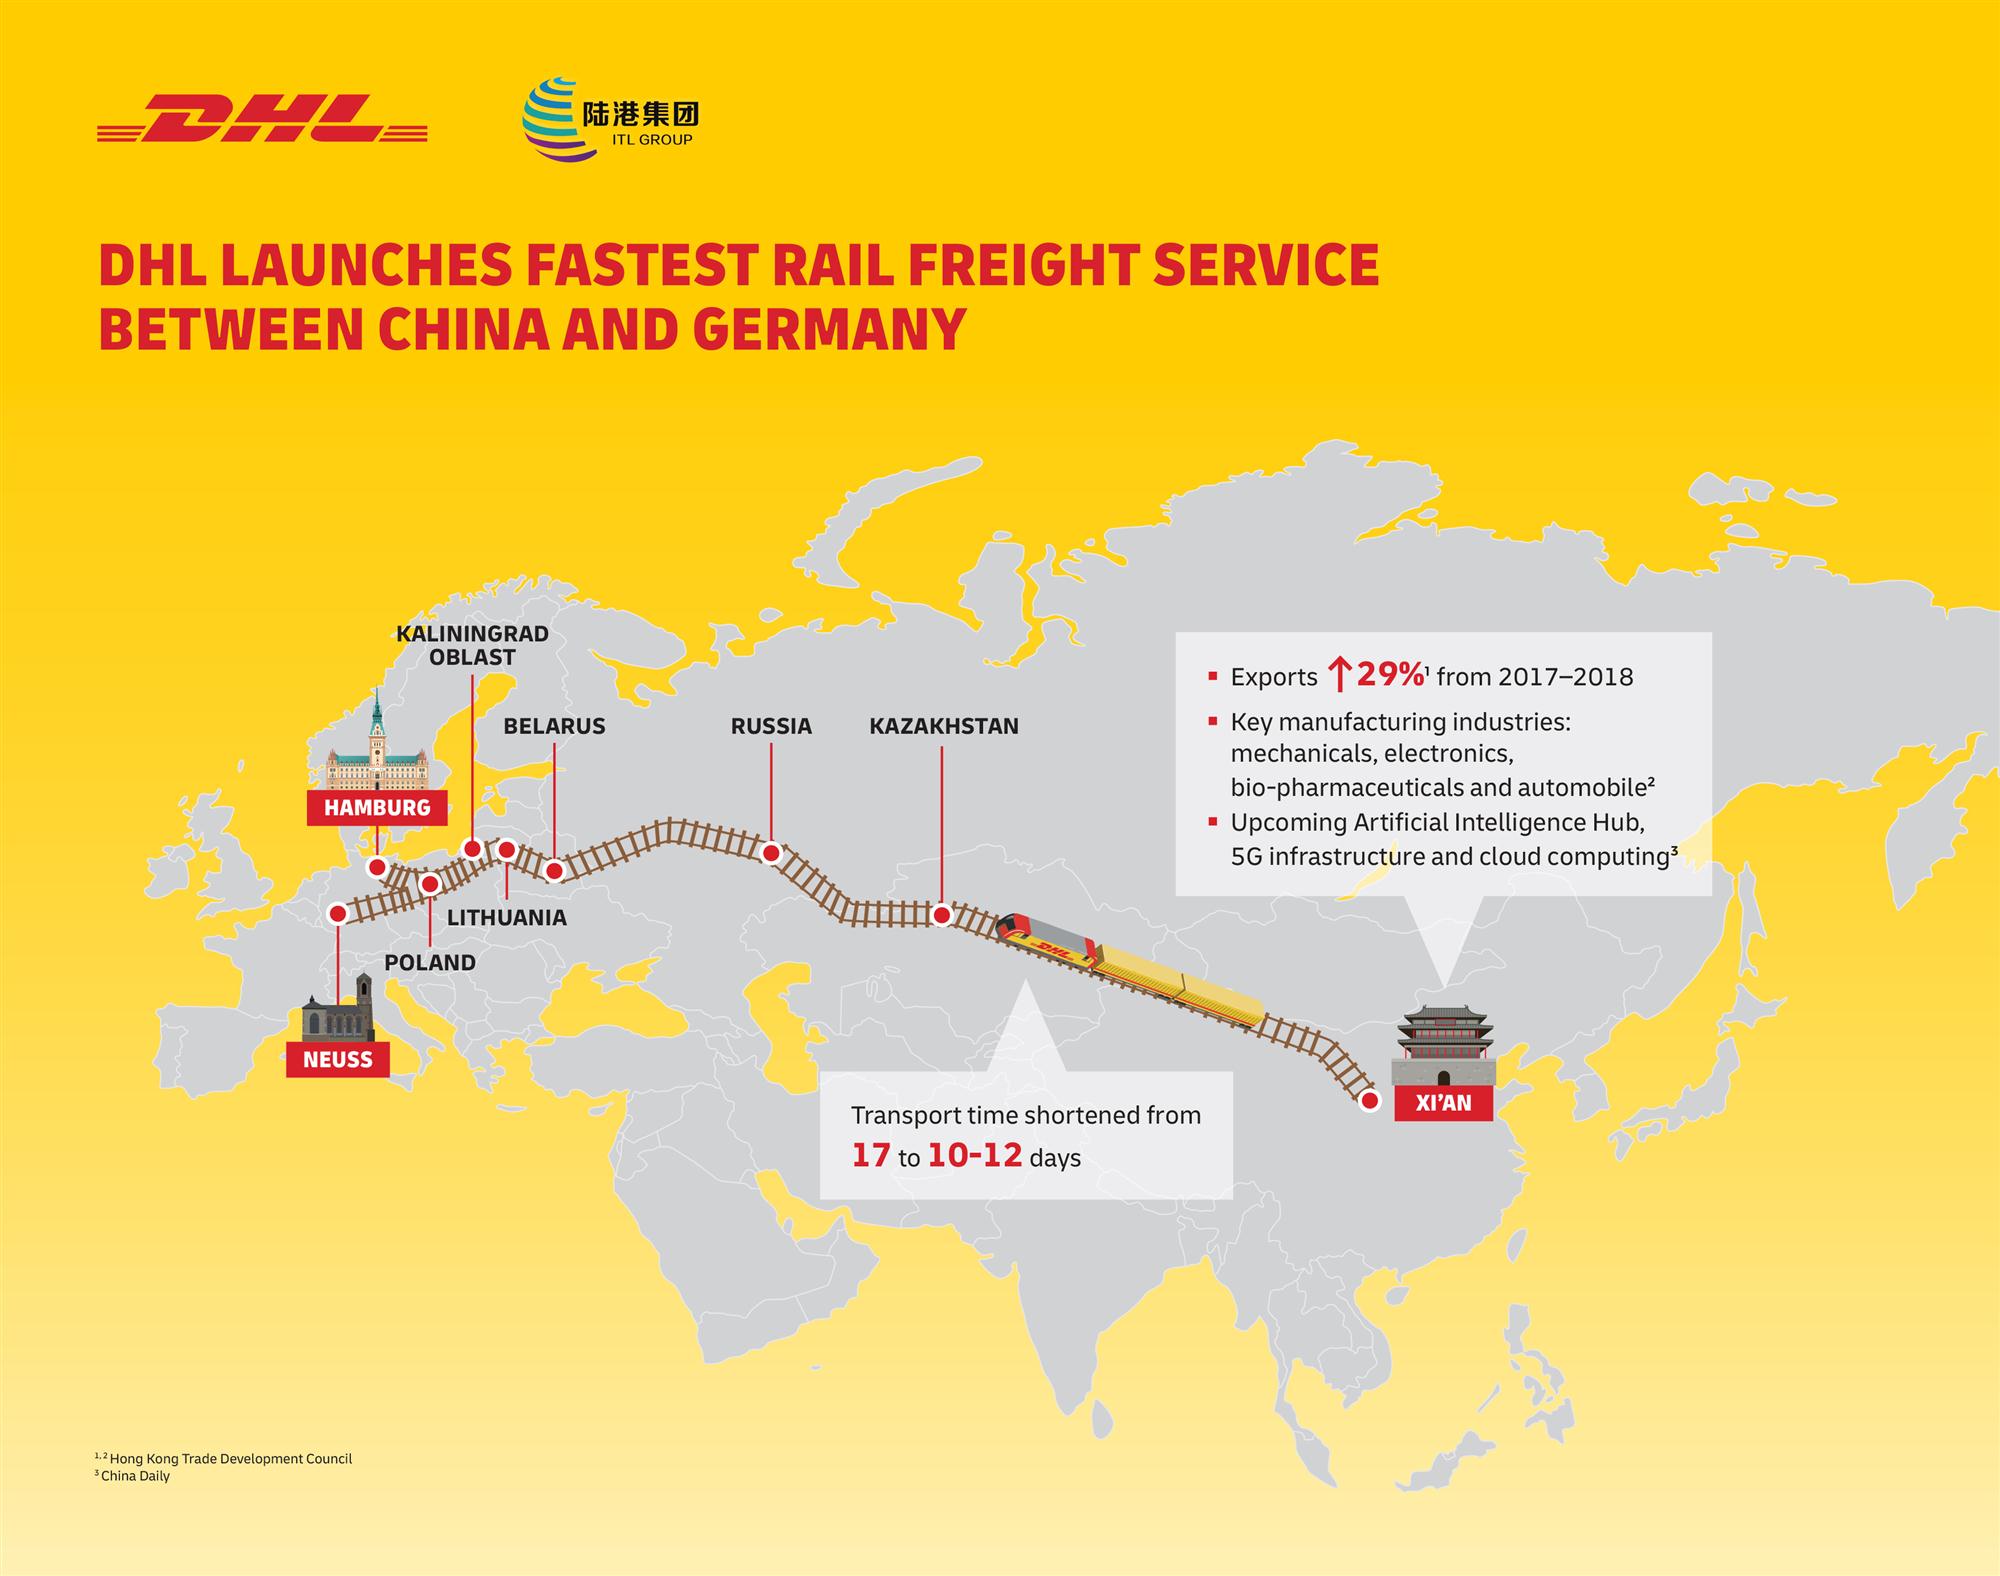 Self Photos / Files - ENG-DHL_ChinatoGermanyExpressRail_Infographic-final